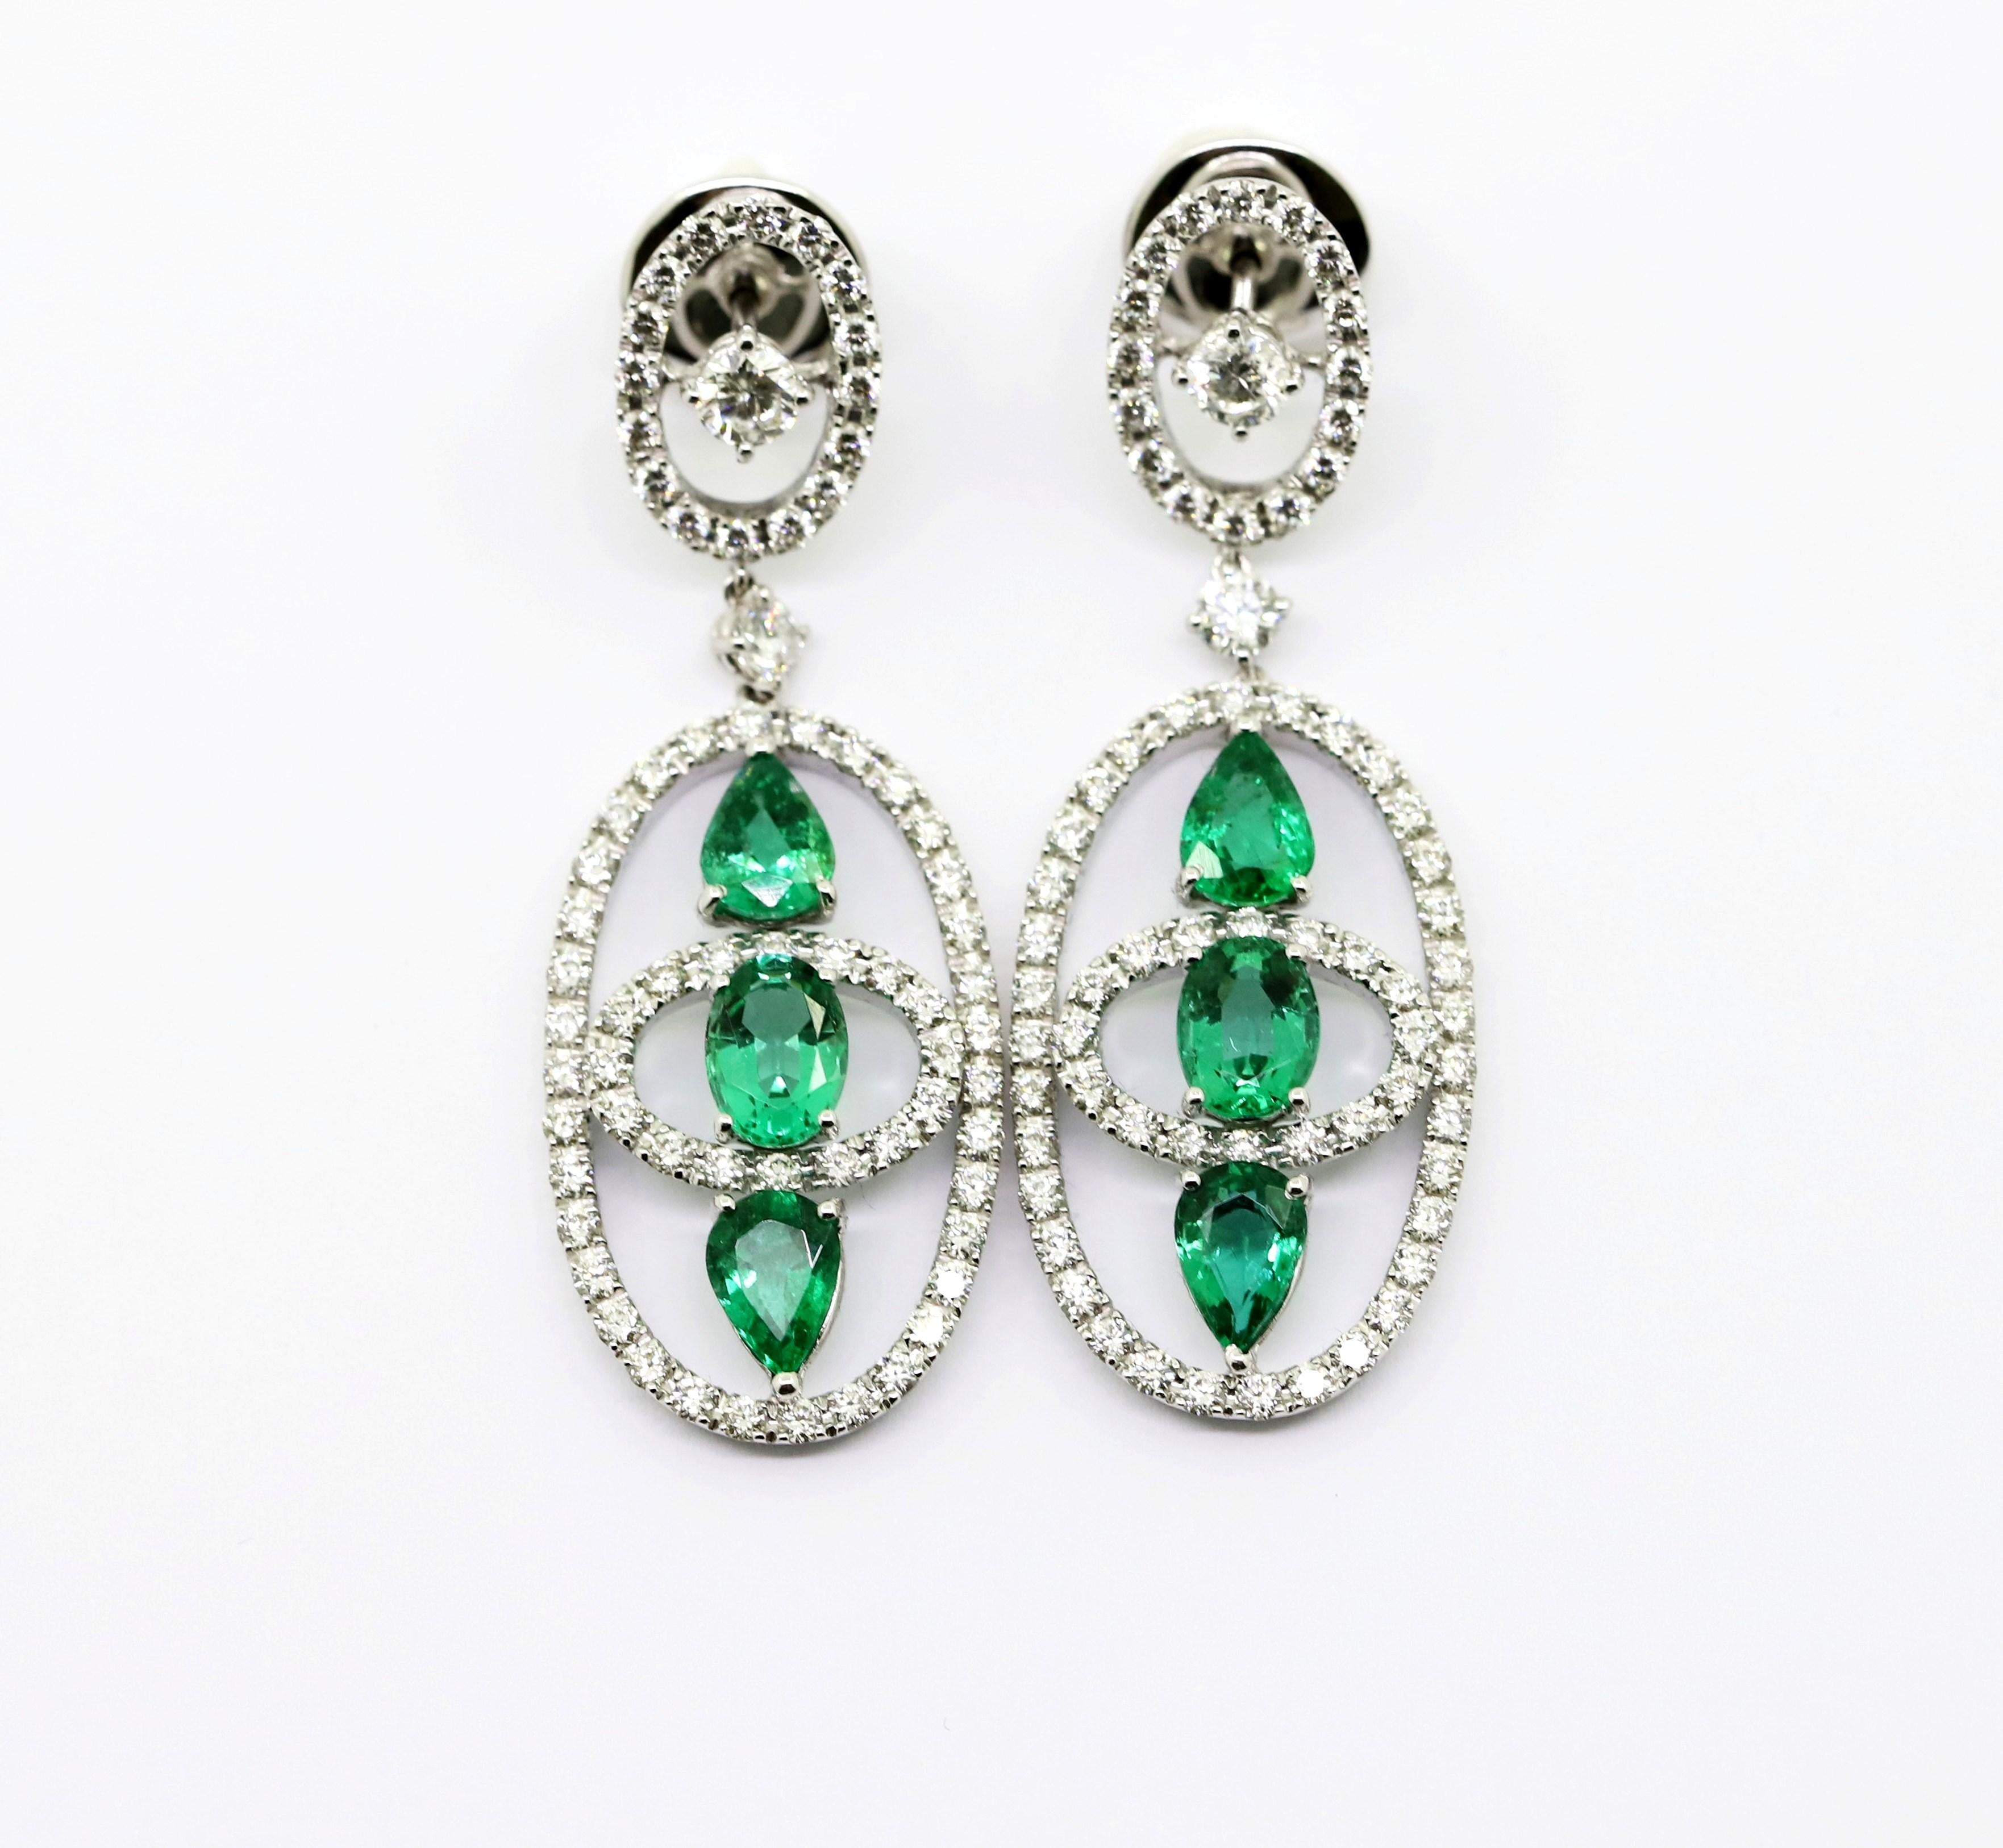 Geometric shapes reminiscent of a satellite.

6 Pear and Oval Shaped Emeralds for 4.04 Carat Total Weight in the Pendant of thise Dangle Earrings,
 framed by 136 pcs Natural White Diamonds for 3.06 Carat Total.

This jewel is entirely Hand-Made in